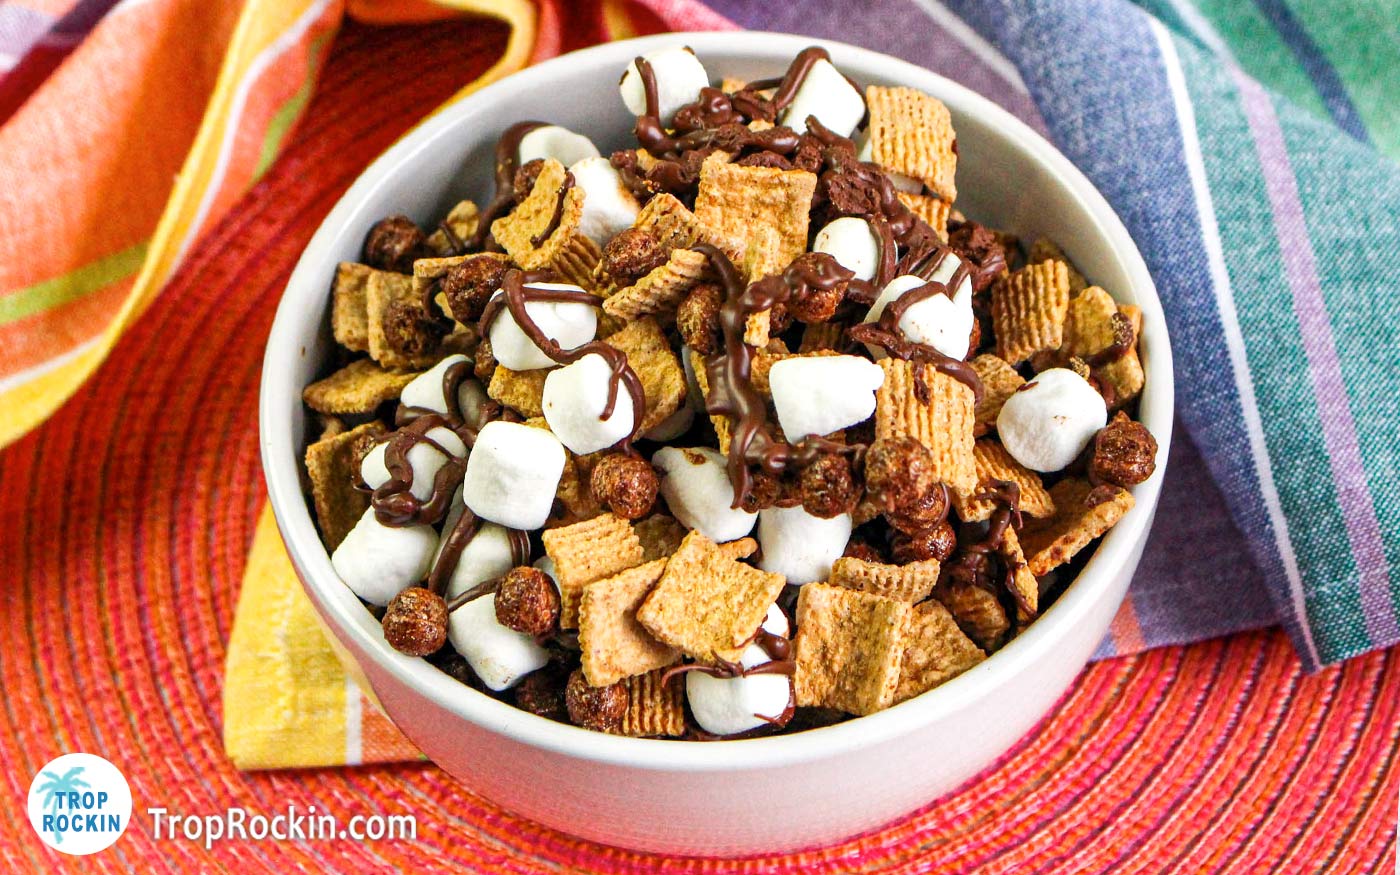 White bowl filled with s'mores snack mix on top of a bright pink place mat and a colorful kitchen towel.